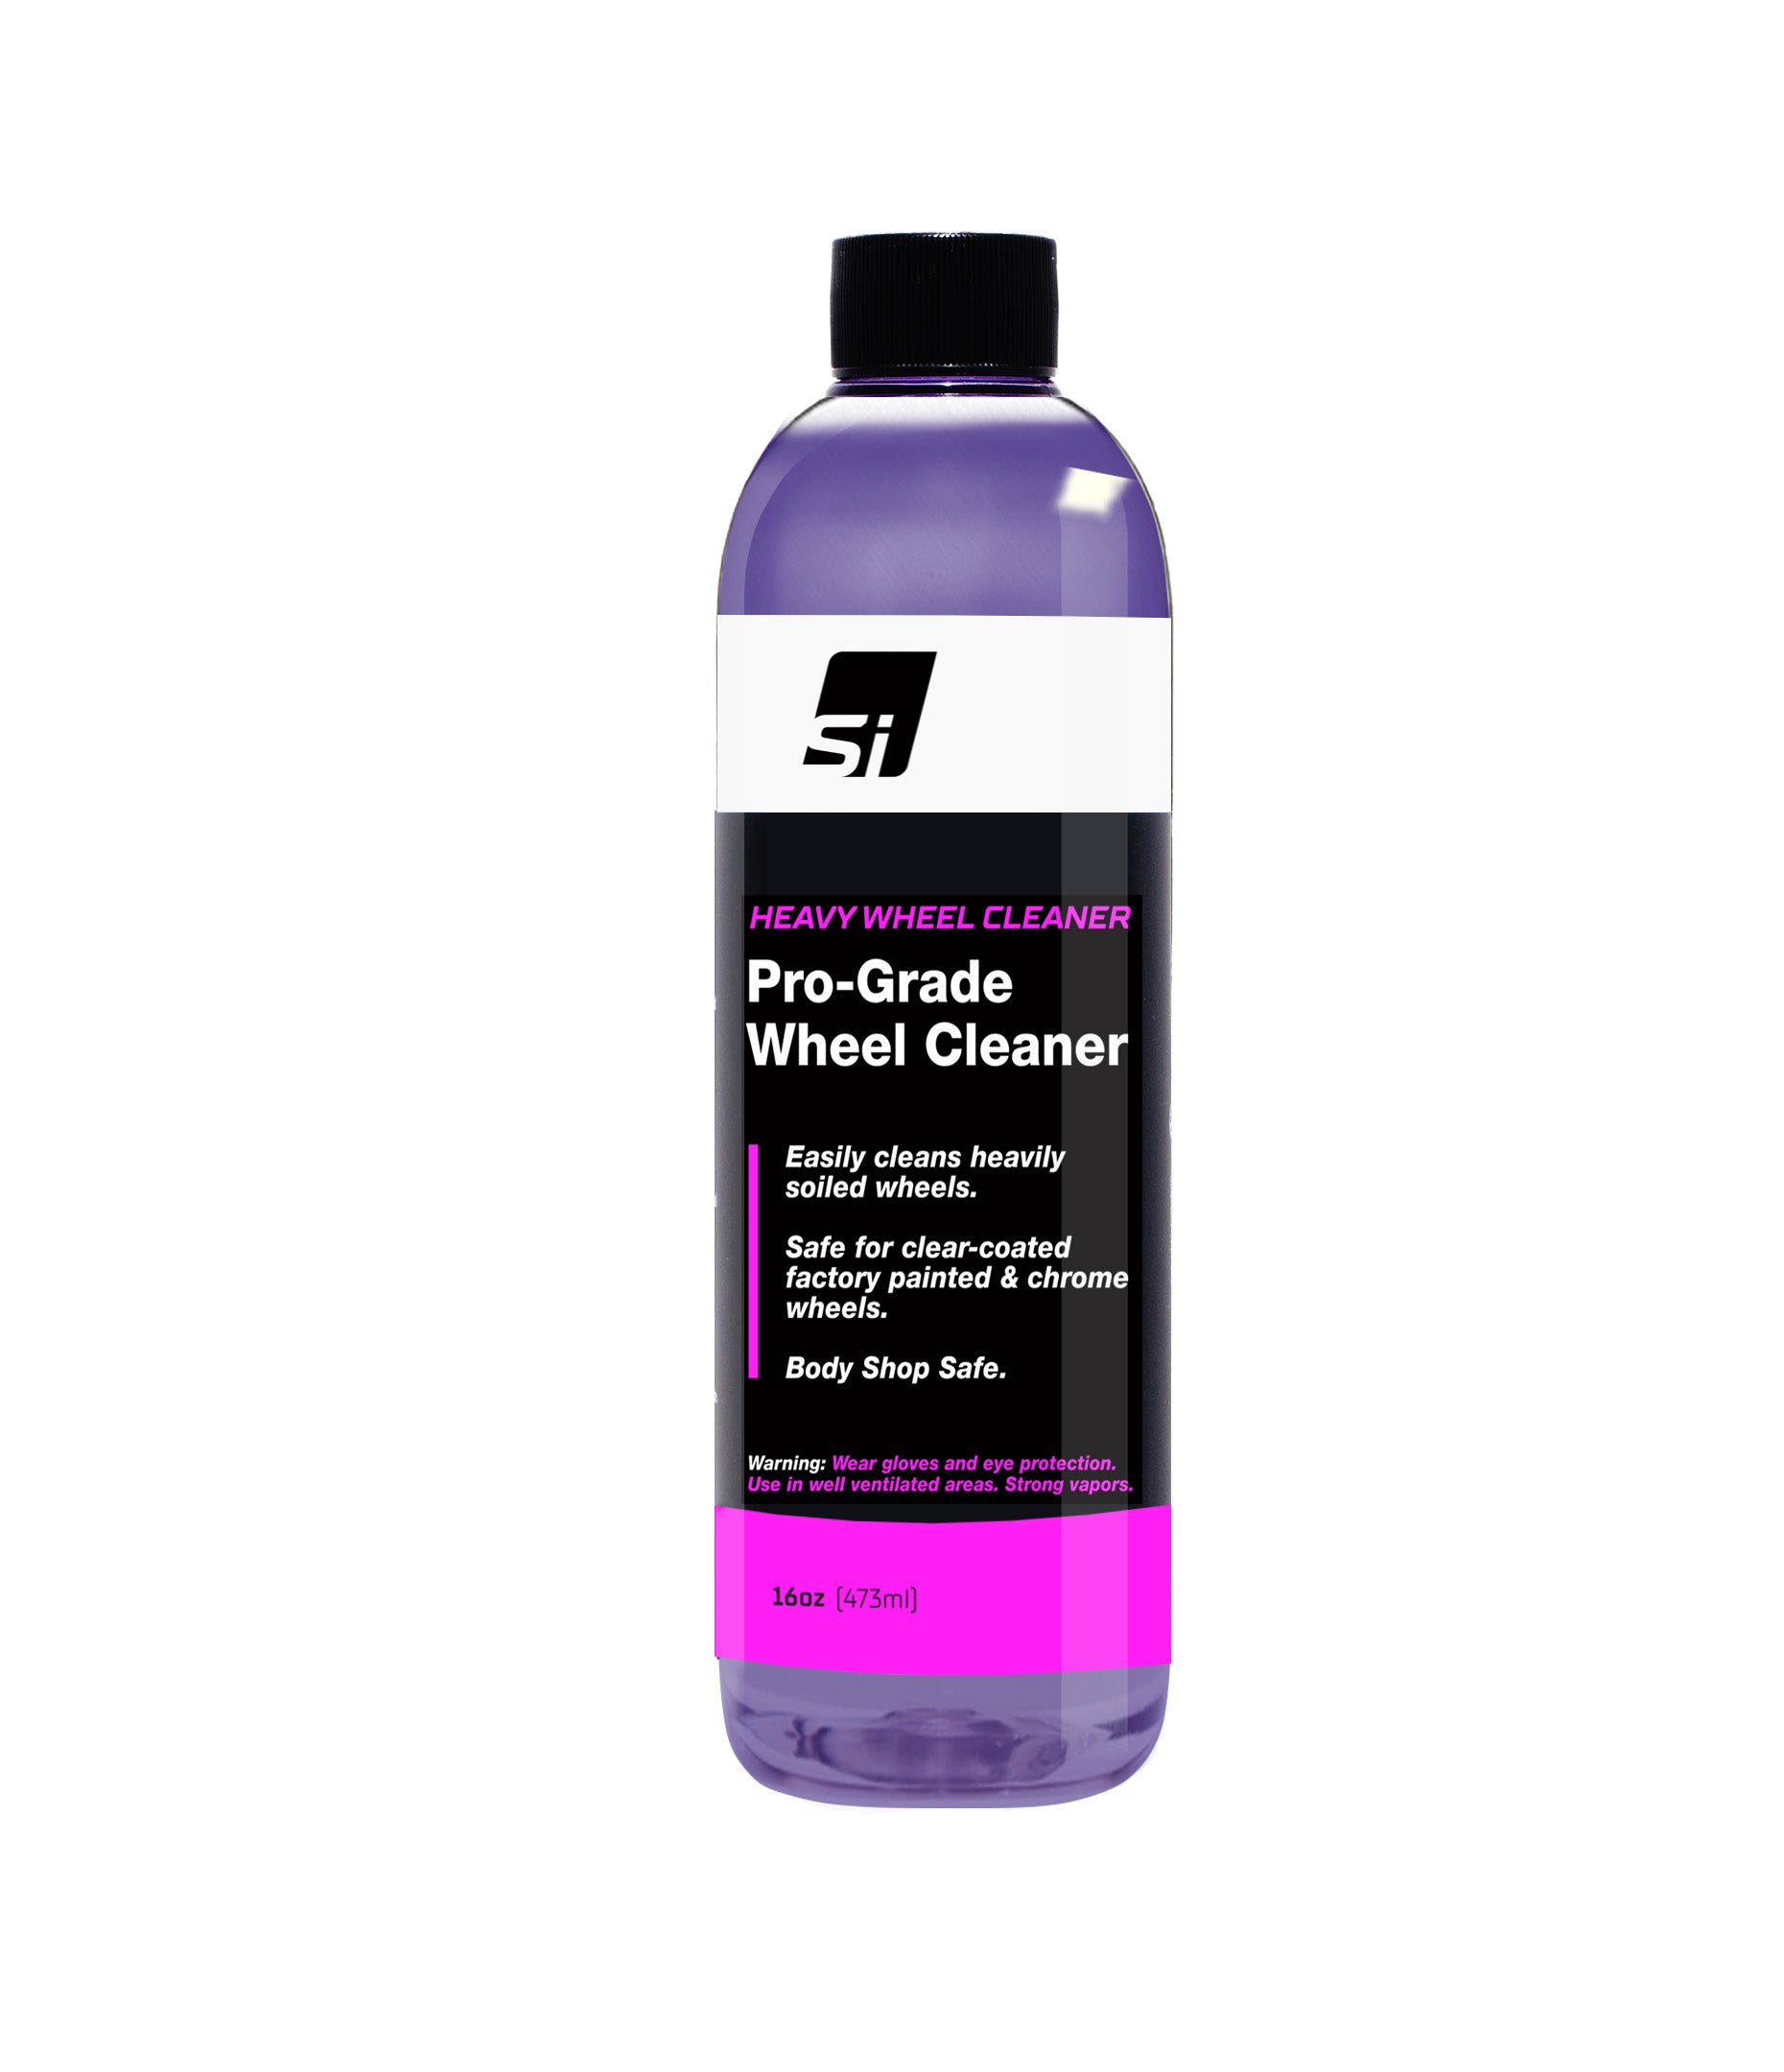 Heavy Wheel Cleaner – Superior Image Car Care